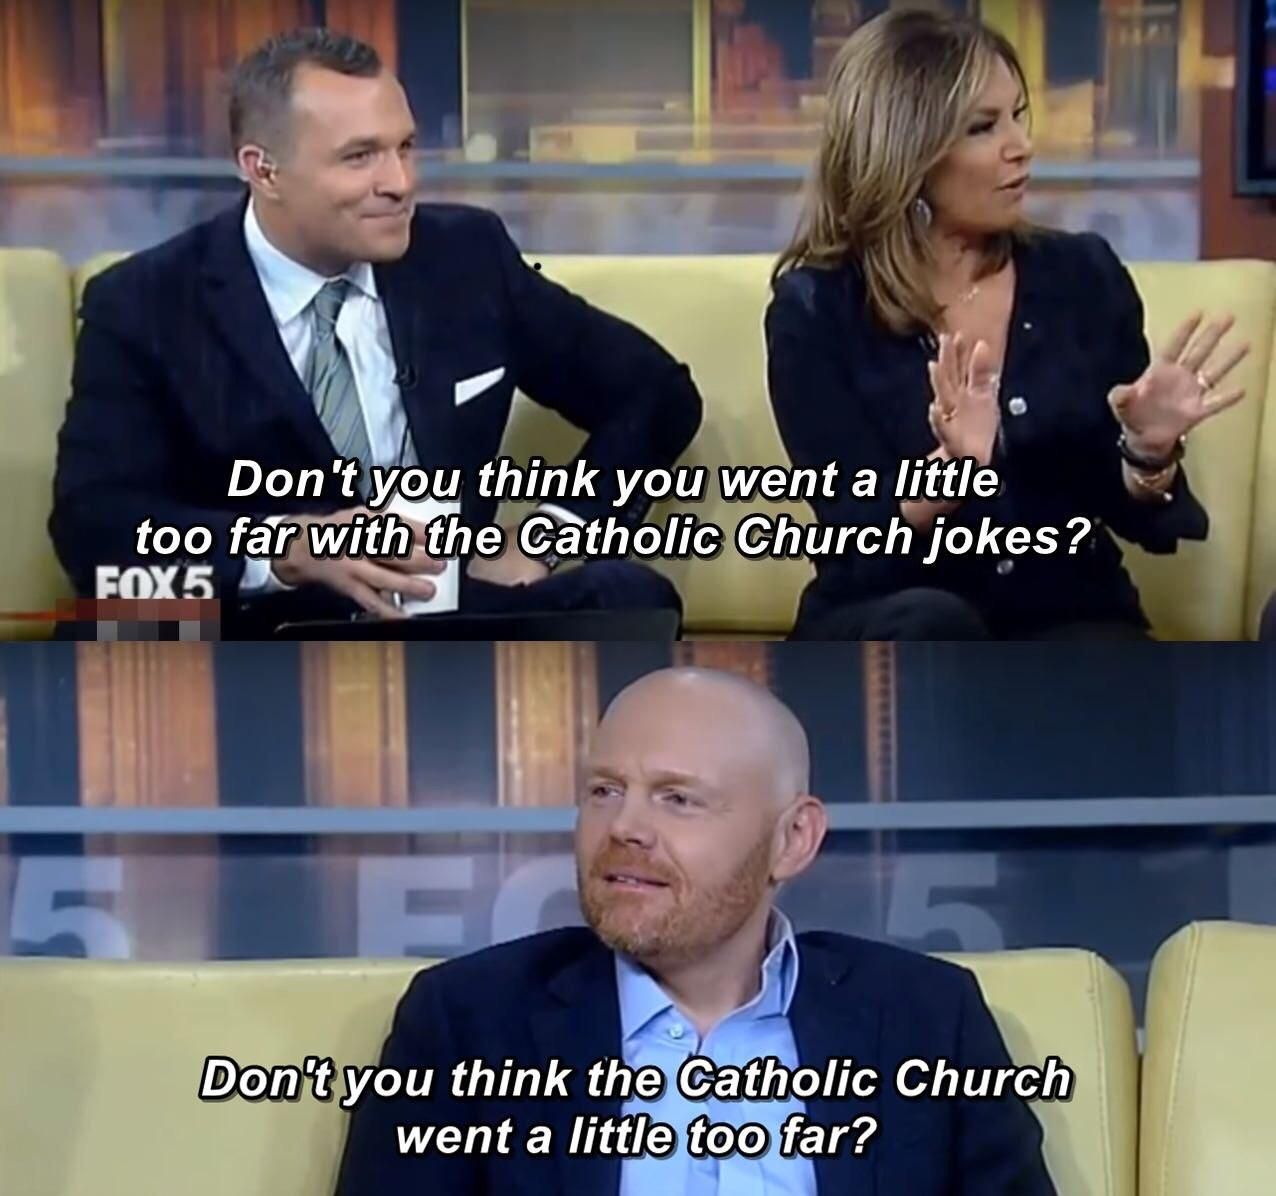 Bill Burr with the roasts